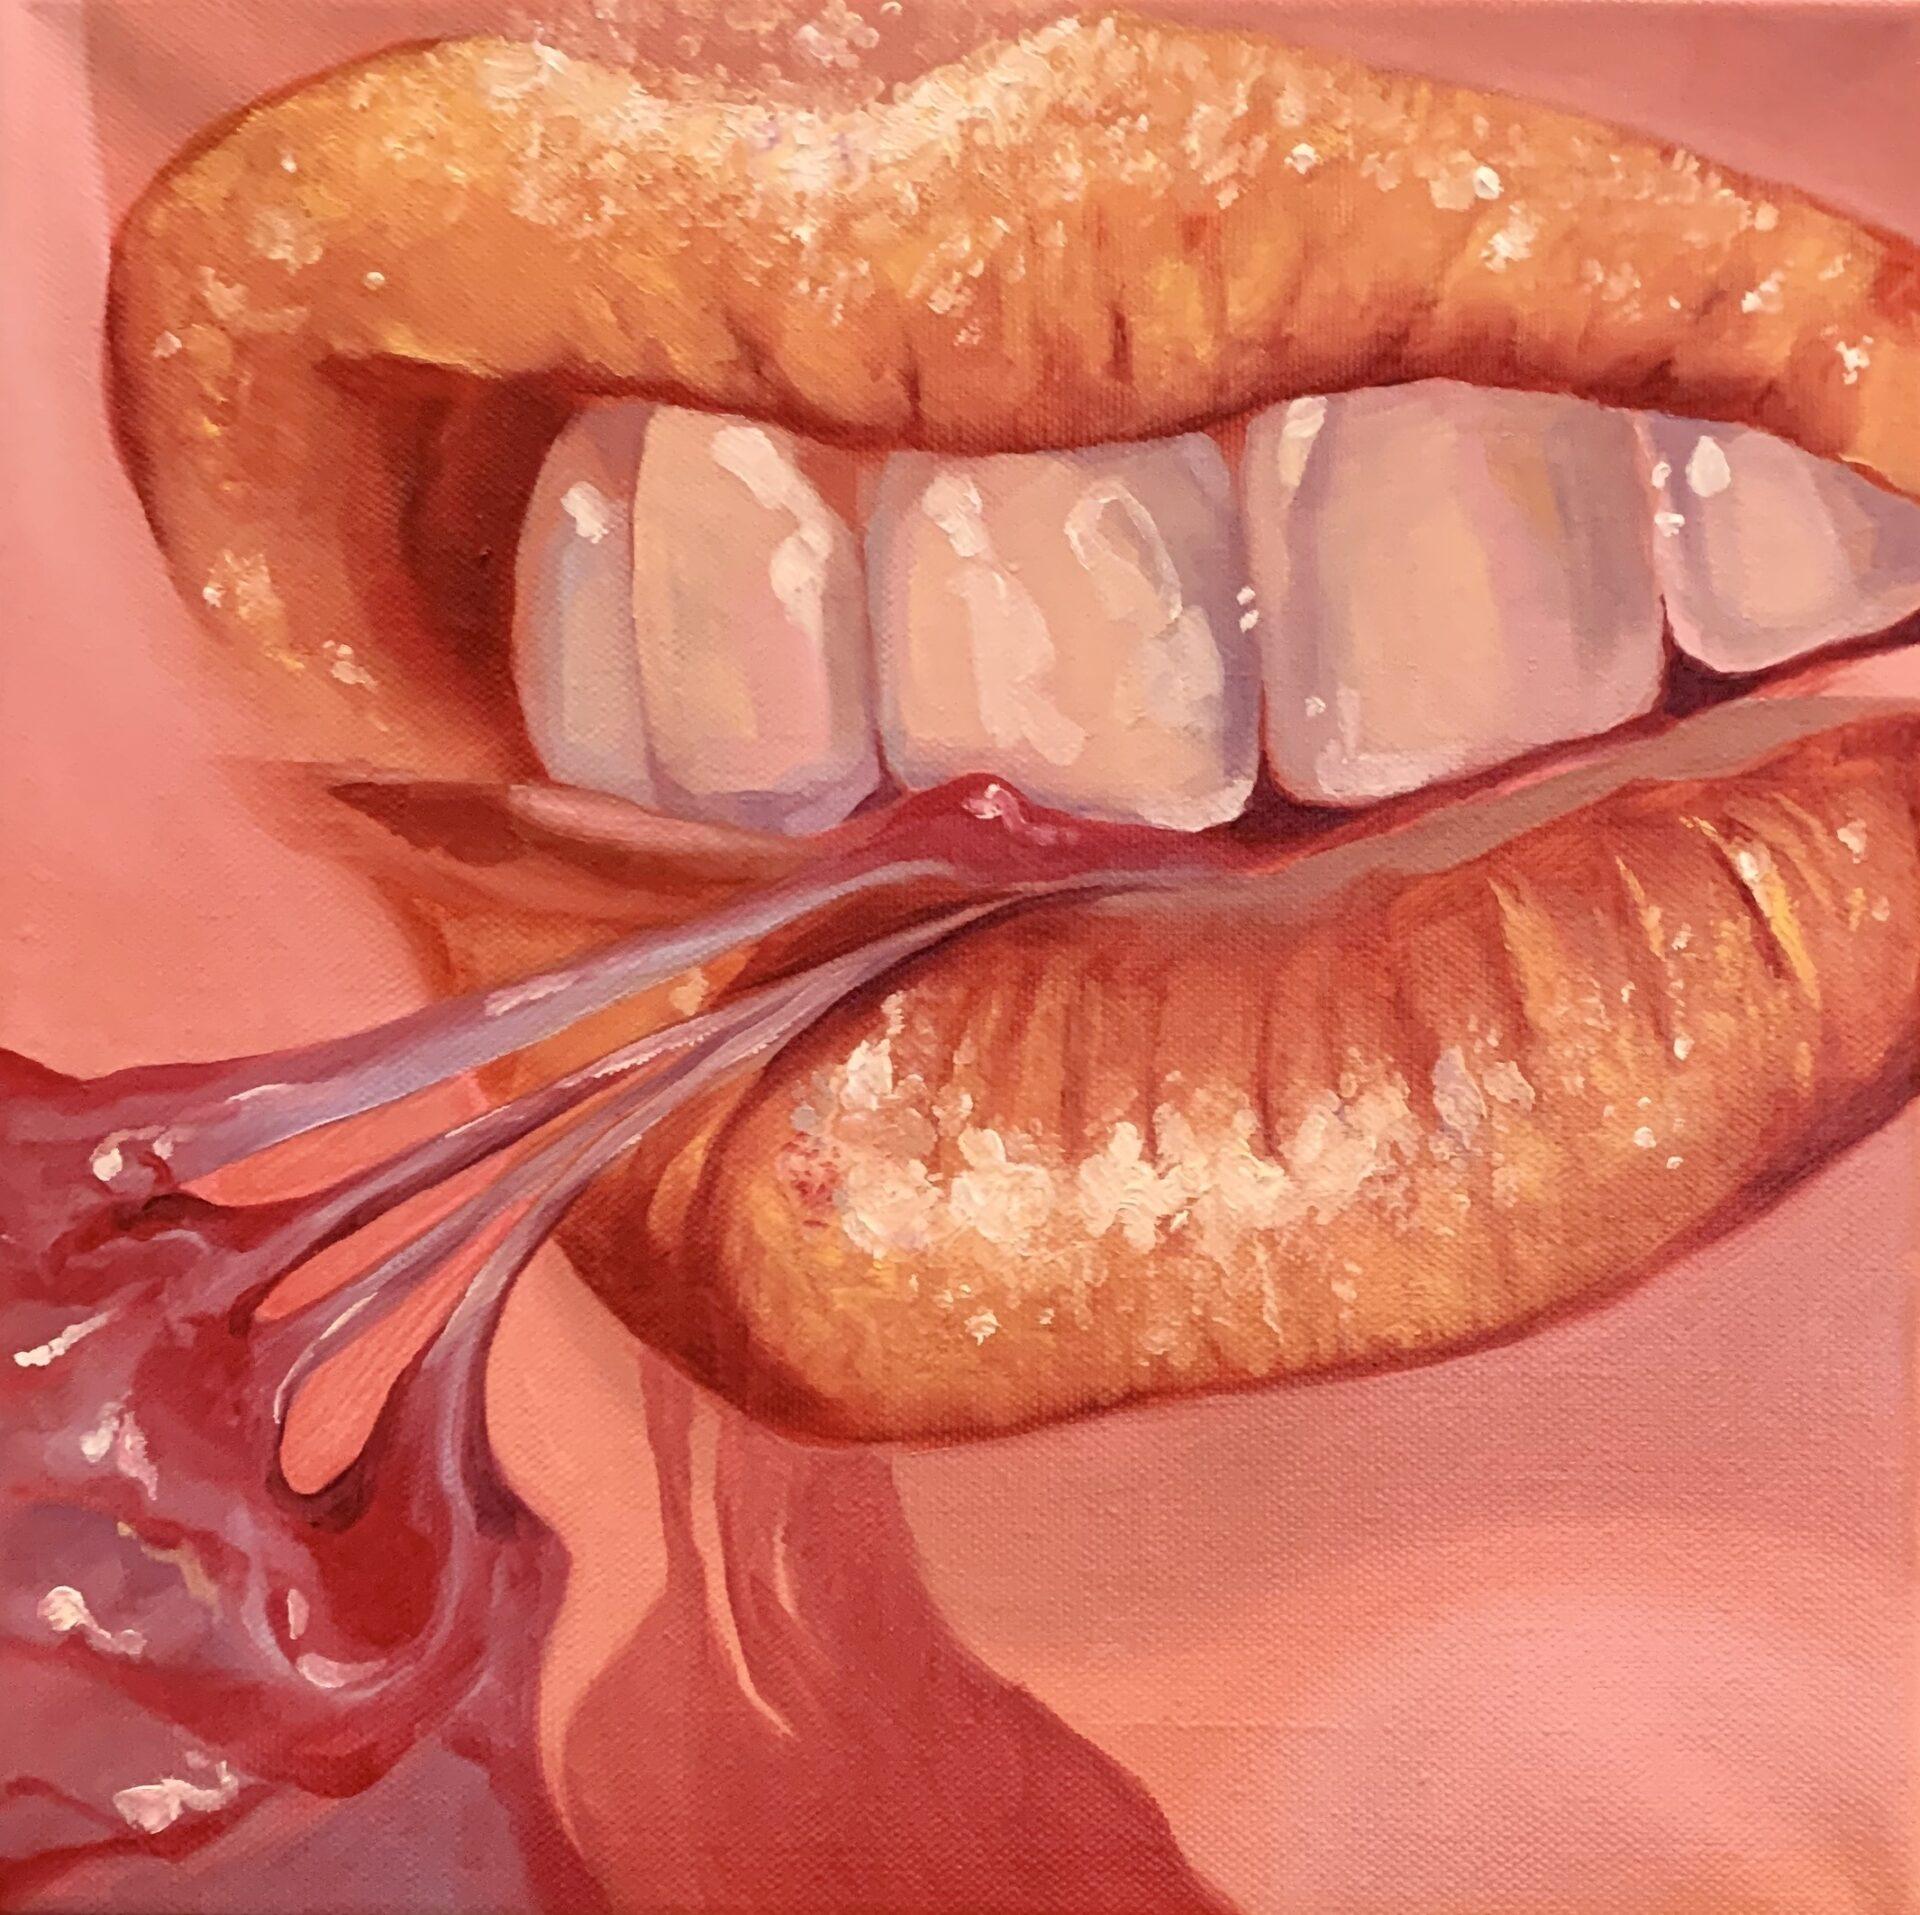 This painting was created based in different in 2 differnt images, the one with the mouth and another with the flesh.

In the painting the teeth are gripping the side of a heart ventricle.

This conection between the two scenes allow the artist to